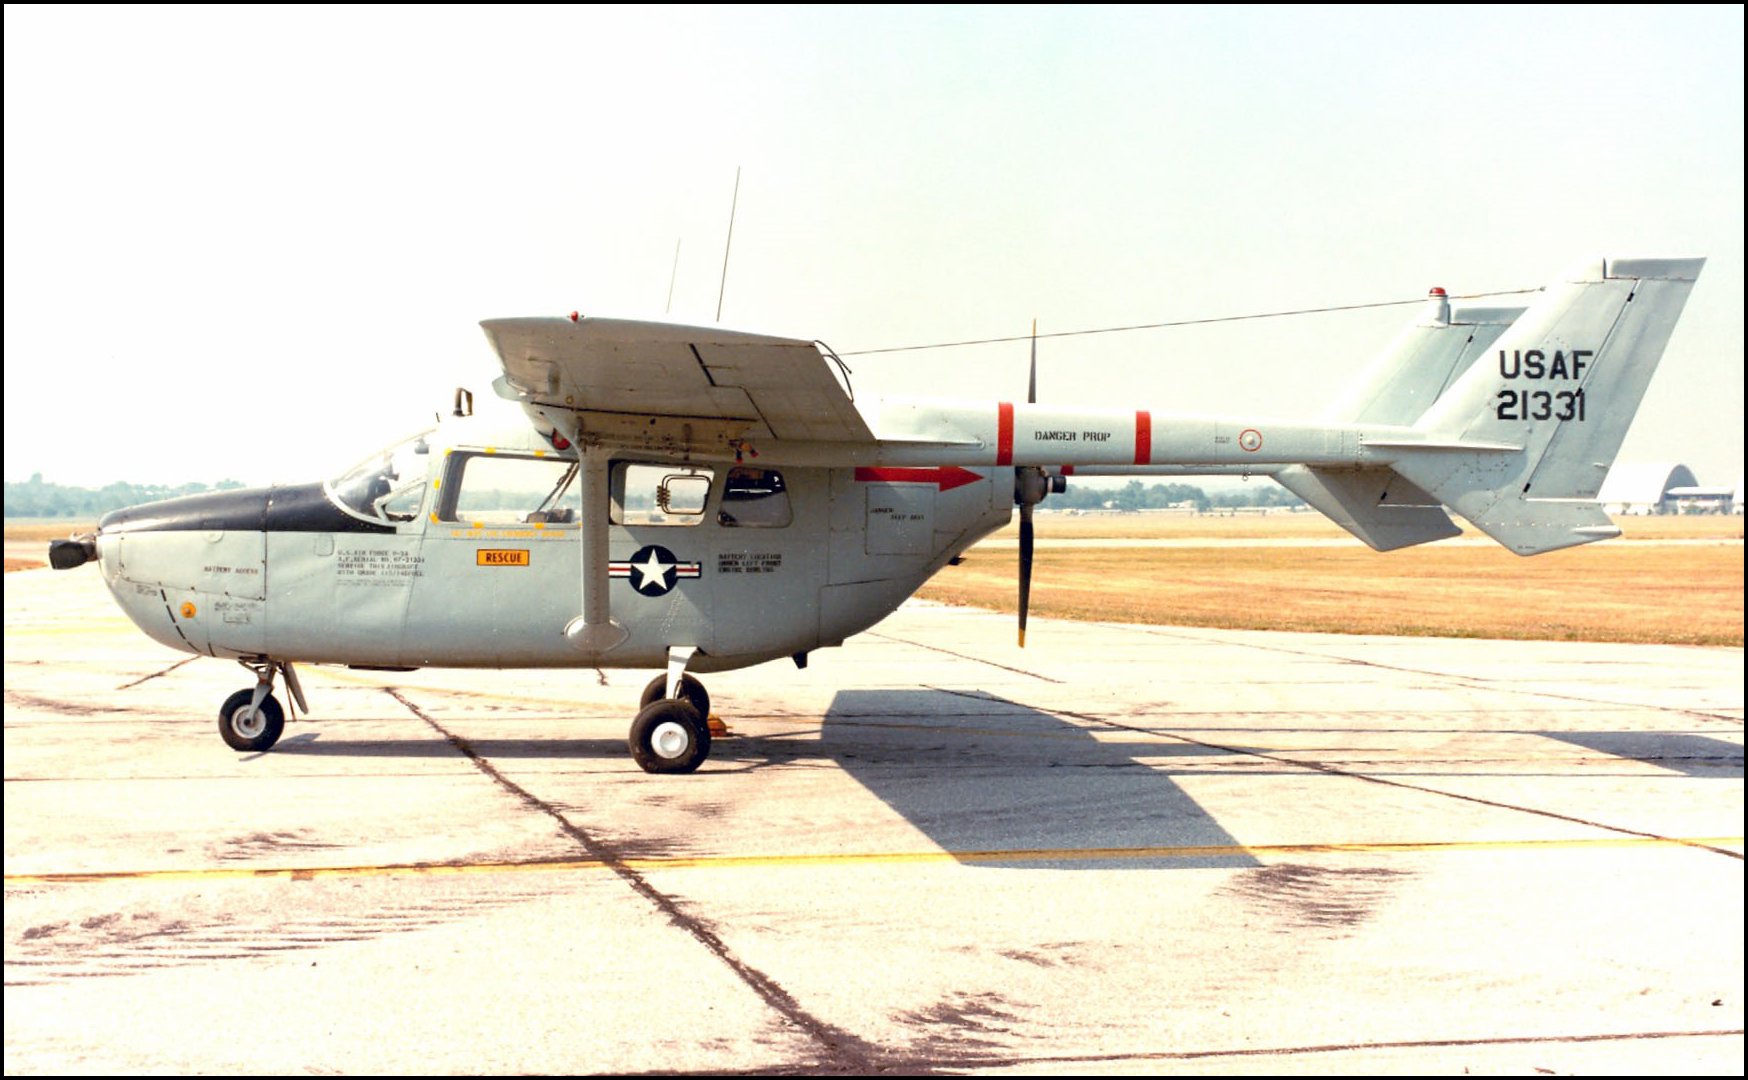 Profile photo of an O-2 Skymaster observation aircraft, much like the one Dickens and Svanoe were flying on June 2, 1969.